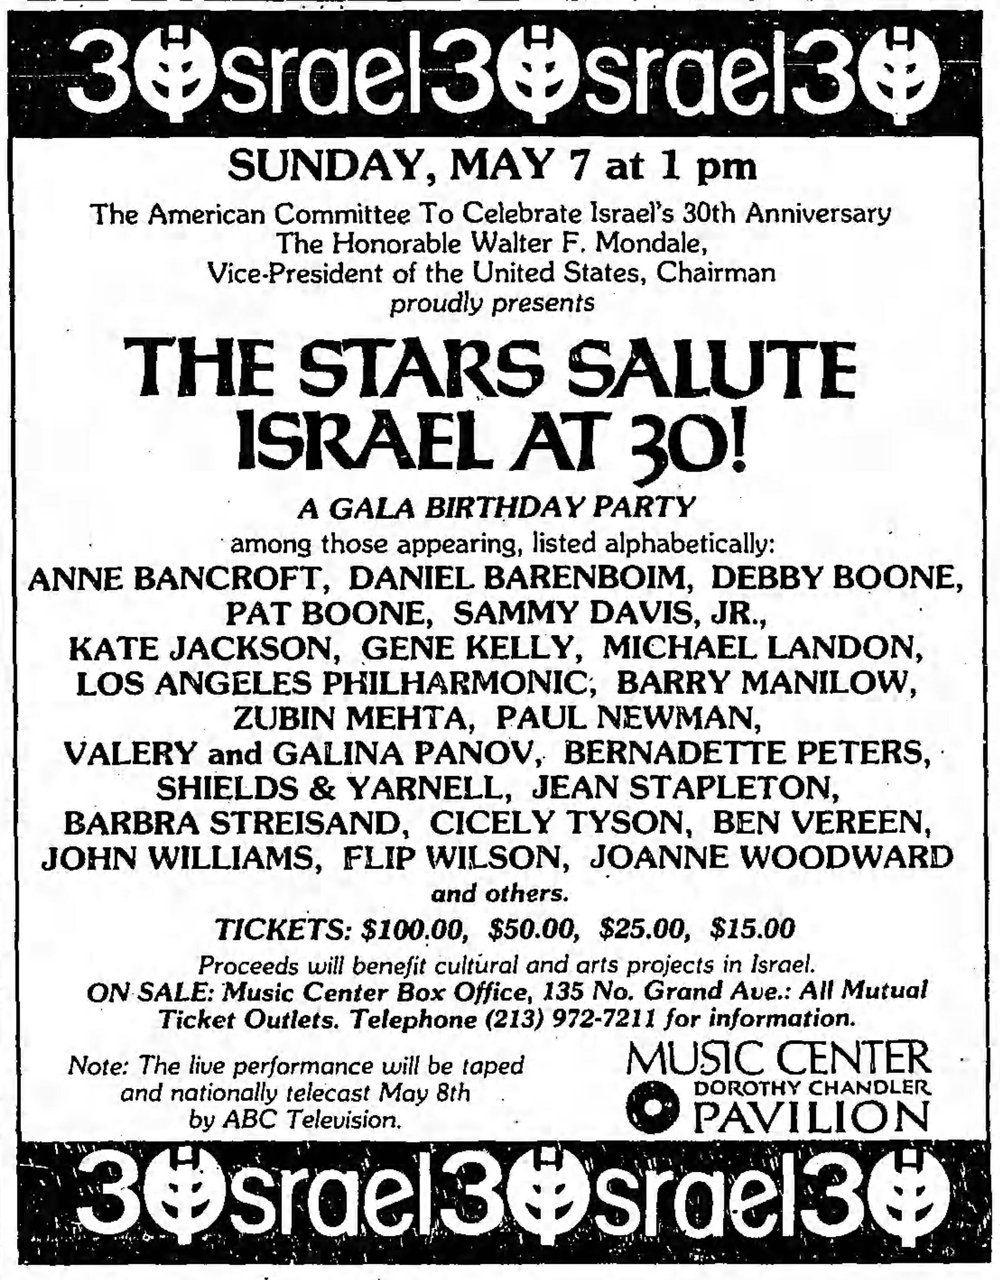 Newspaper ad for The Stars Salute Israel at 30!